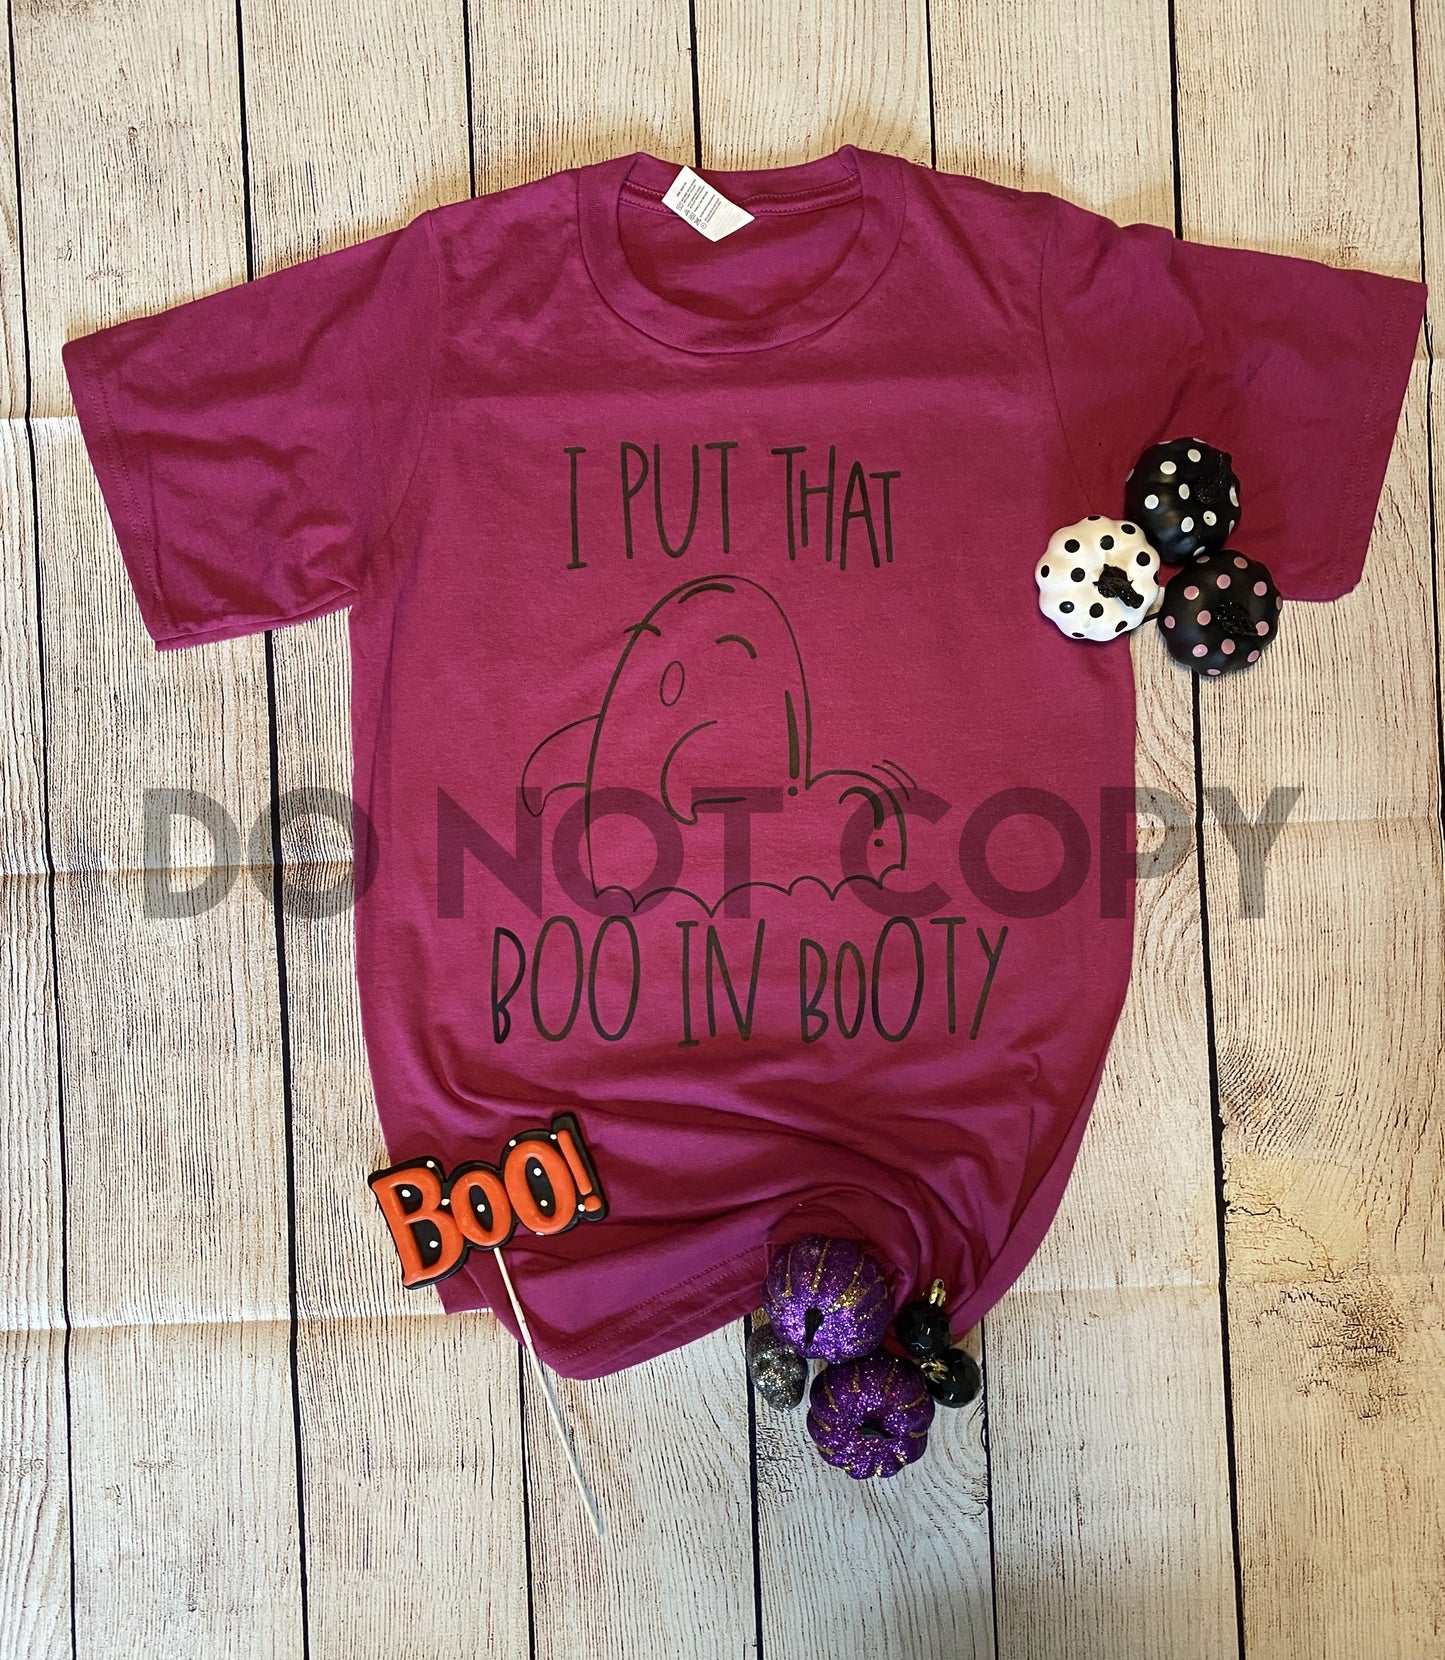 I put that boo in booty Screen Print transfer one color plastisol